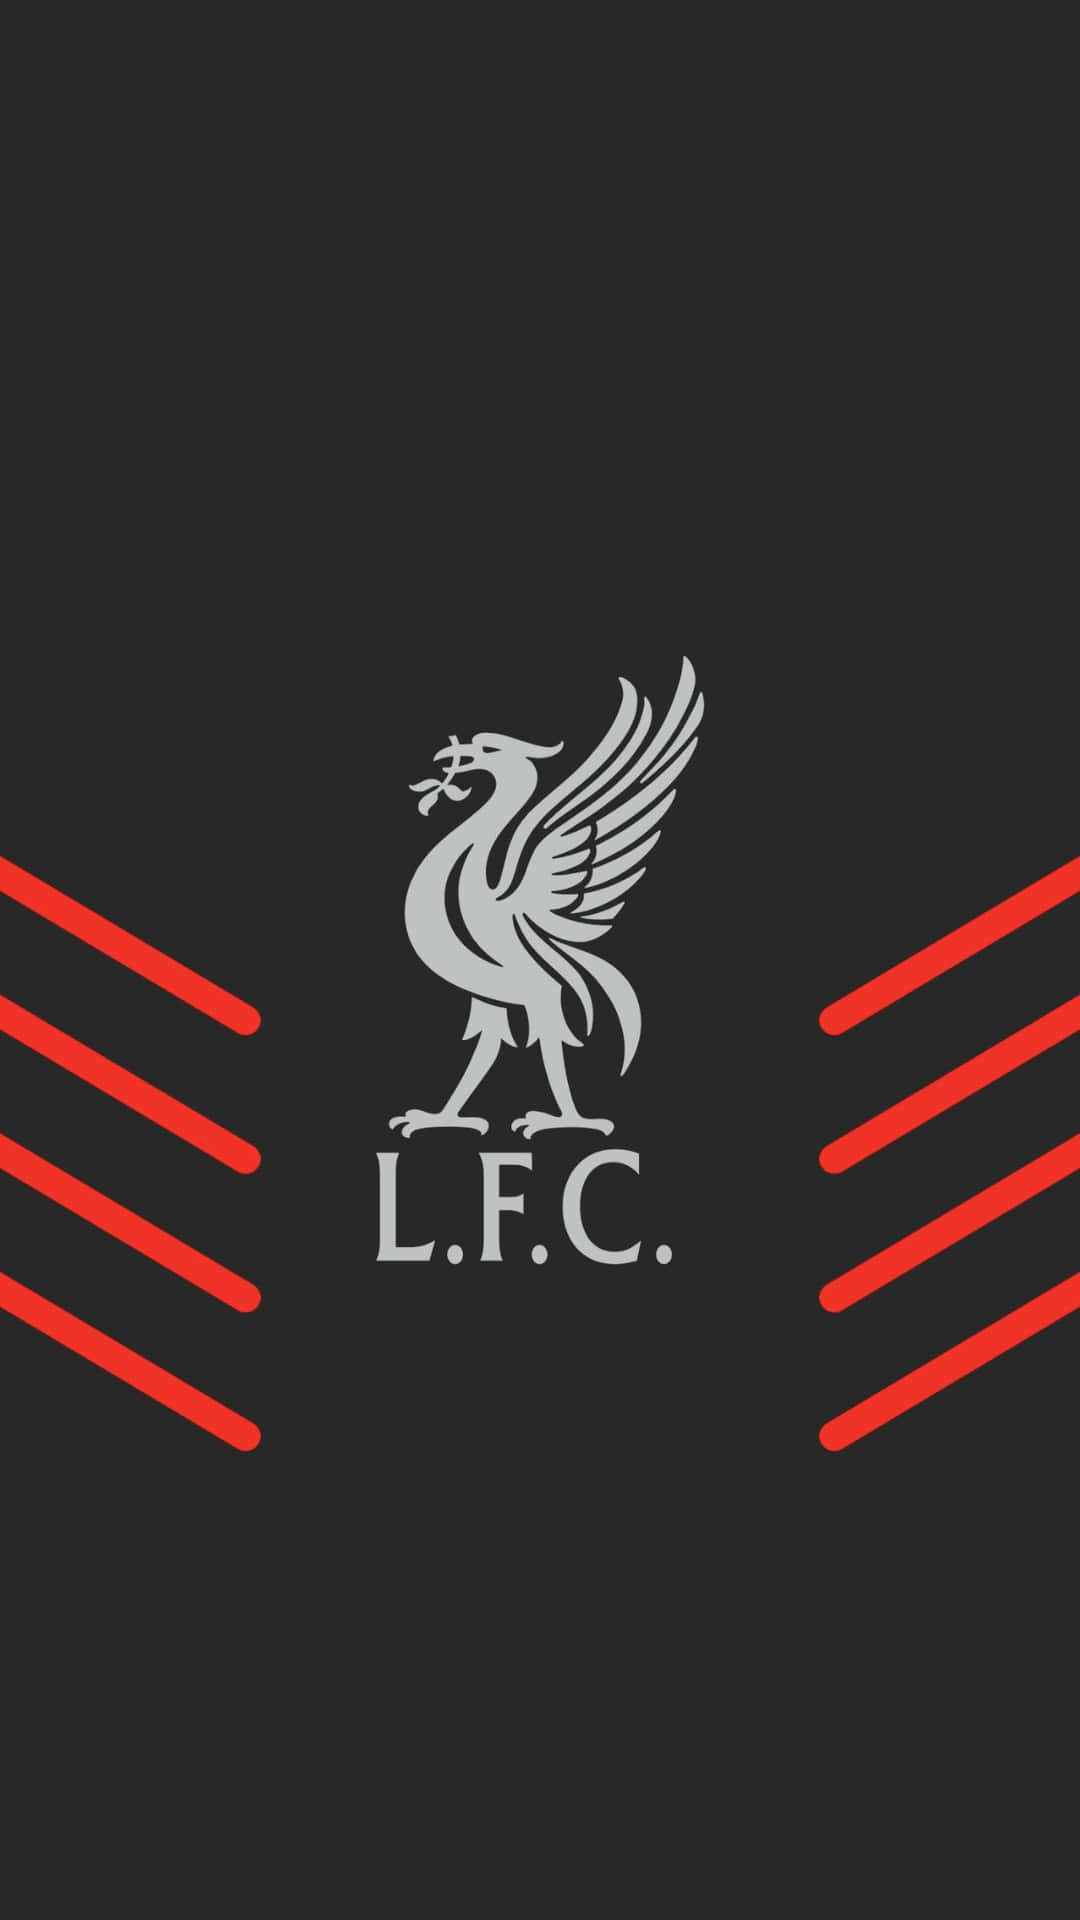 An Image of a Liverpool Iphone Wallpaper